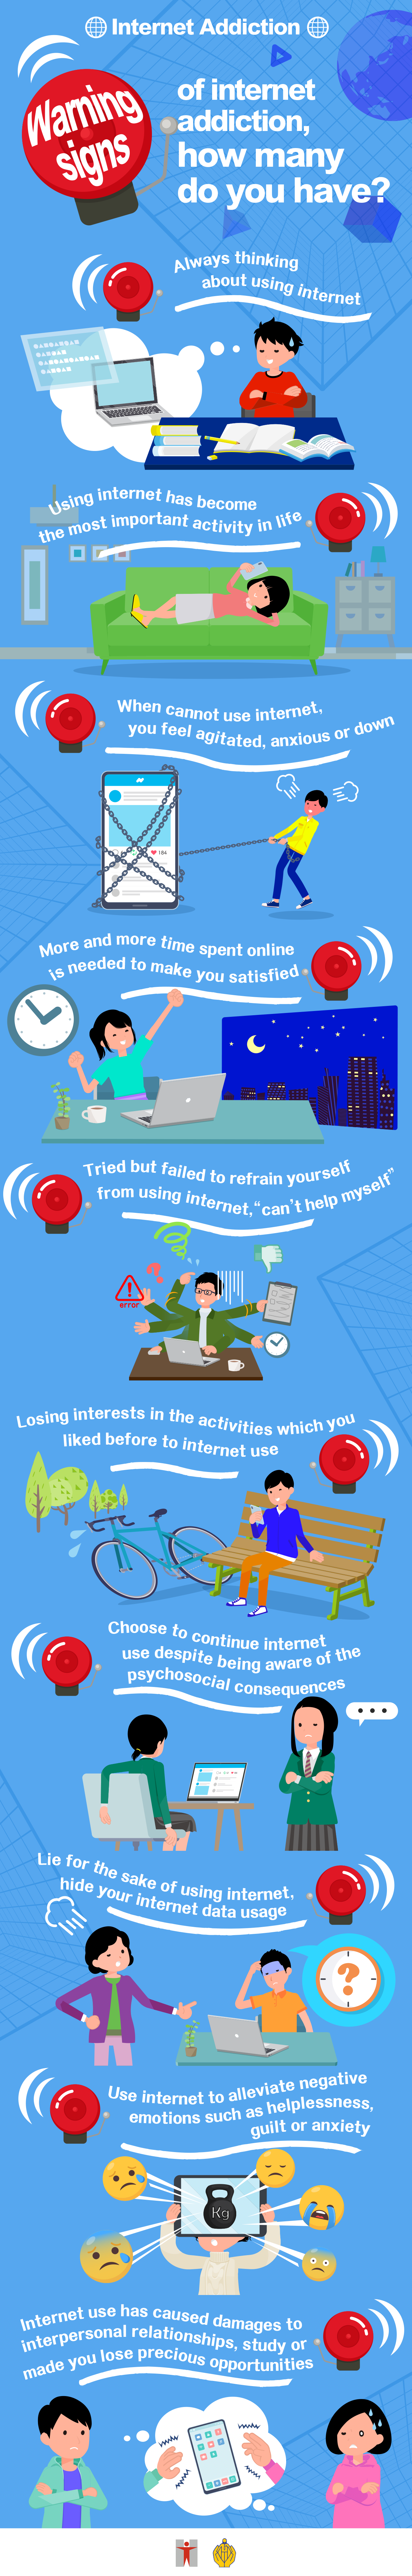 Internet Addiction / Warning signs of internet addiction, how many do you have? / Always thinking about using internet / Using internet has become the most important activity in life / When cannot use internet, you feel agitated, anxious or down / More and more time spent online is needed to make you satisfied / Tried but failed to refrain yourself from using internet, “can’t help myself” / Losing interests in the activities which you liked before to internet use  / Choose to continue internet use despite being aware of the psychosocial consequences / Lie for the sake of using internet, hide your internet data usage / Use internet to alleviate negative emotions such as helplessness, guilt or anxiety / Internet use has caused damages to interpersonal relationships, study or made you lose precious opportunities